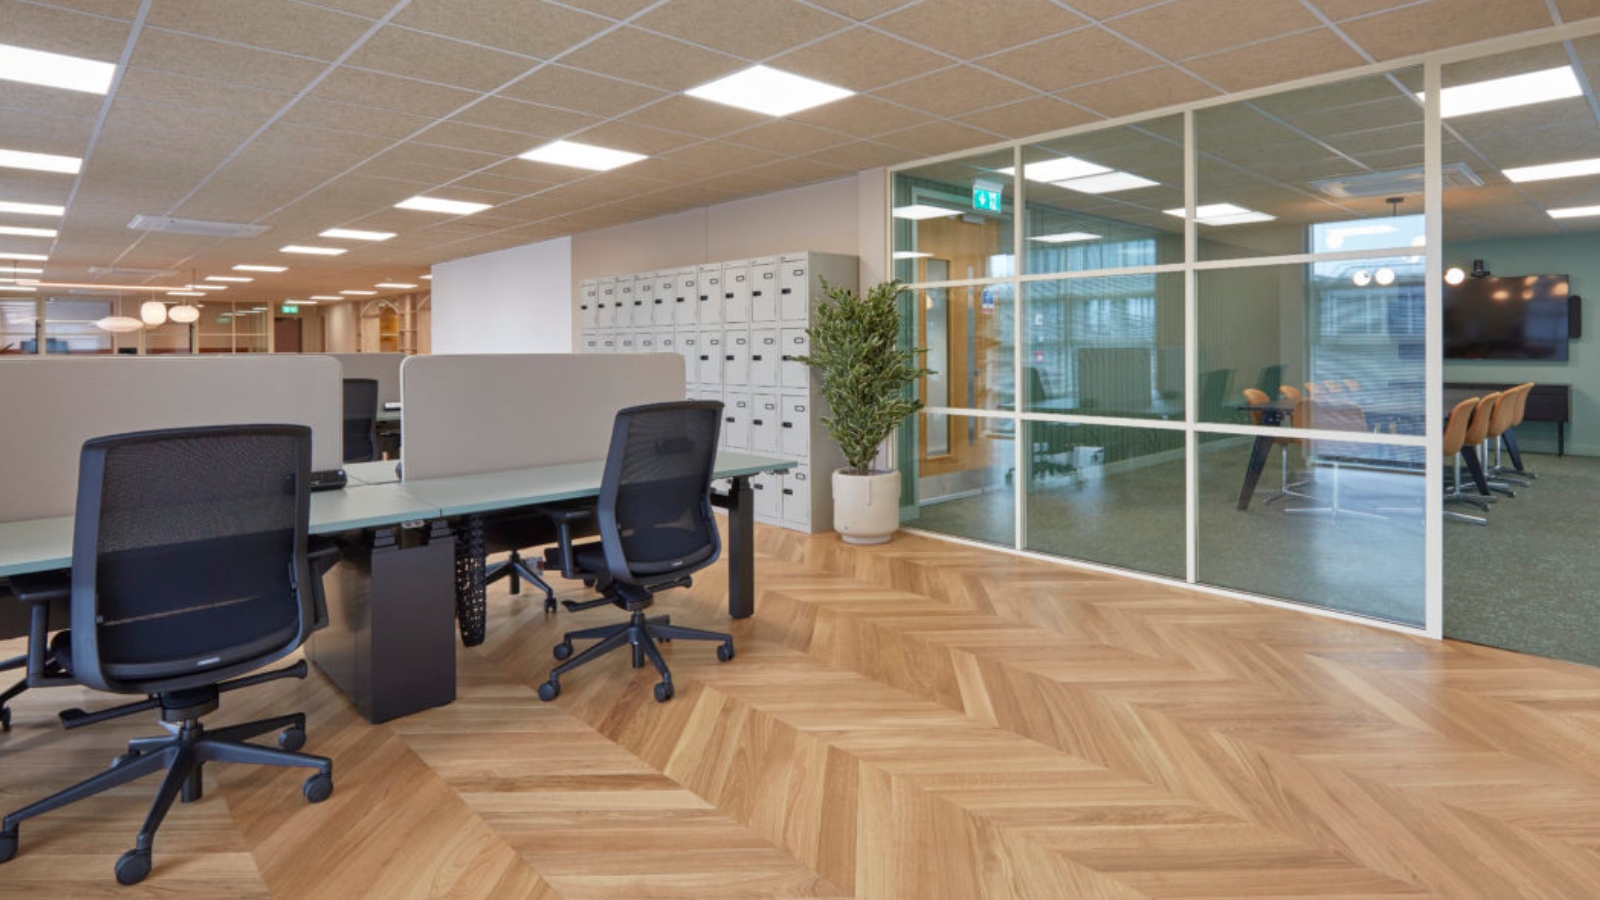 Bespoke Office Desks That Drive Efficiency and Leave a Lasting Impression